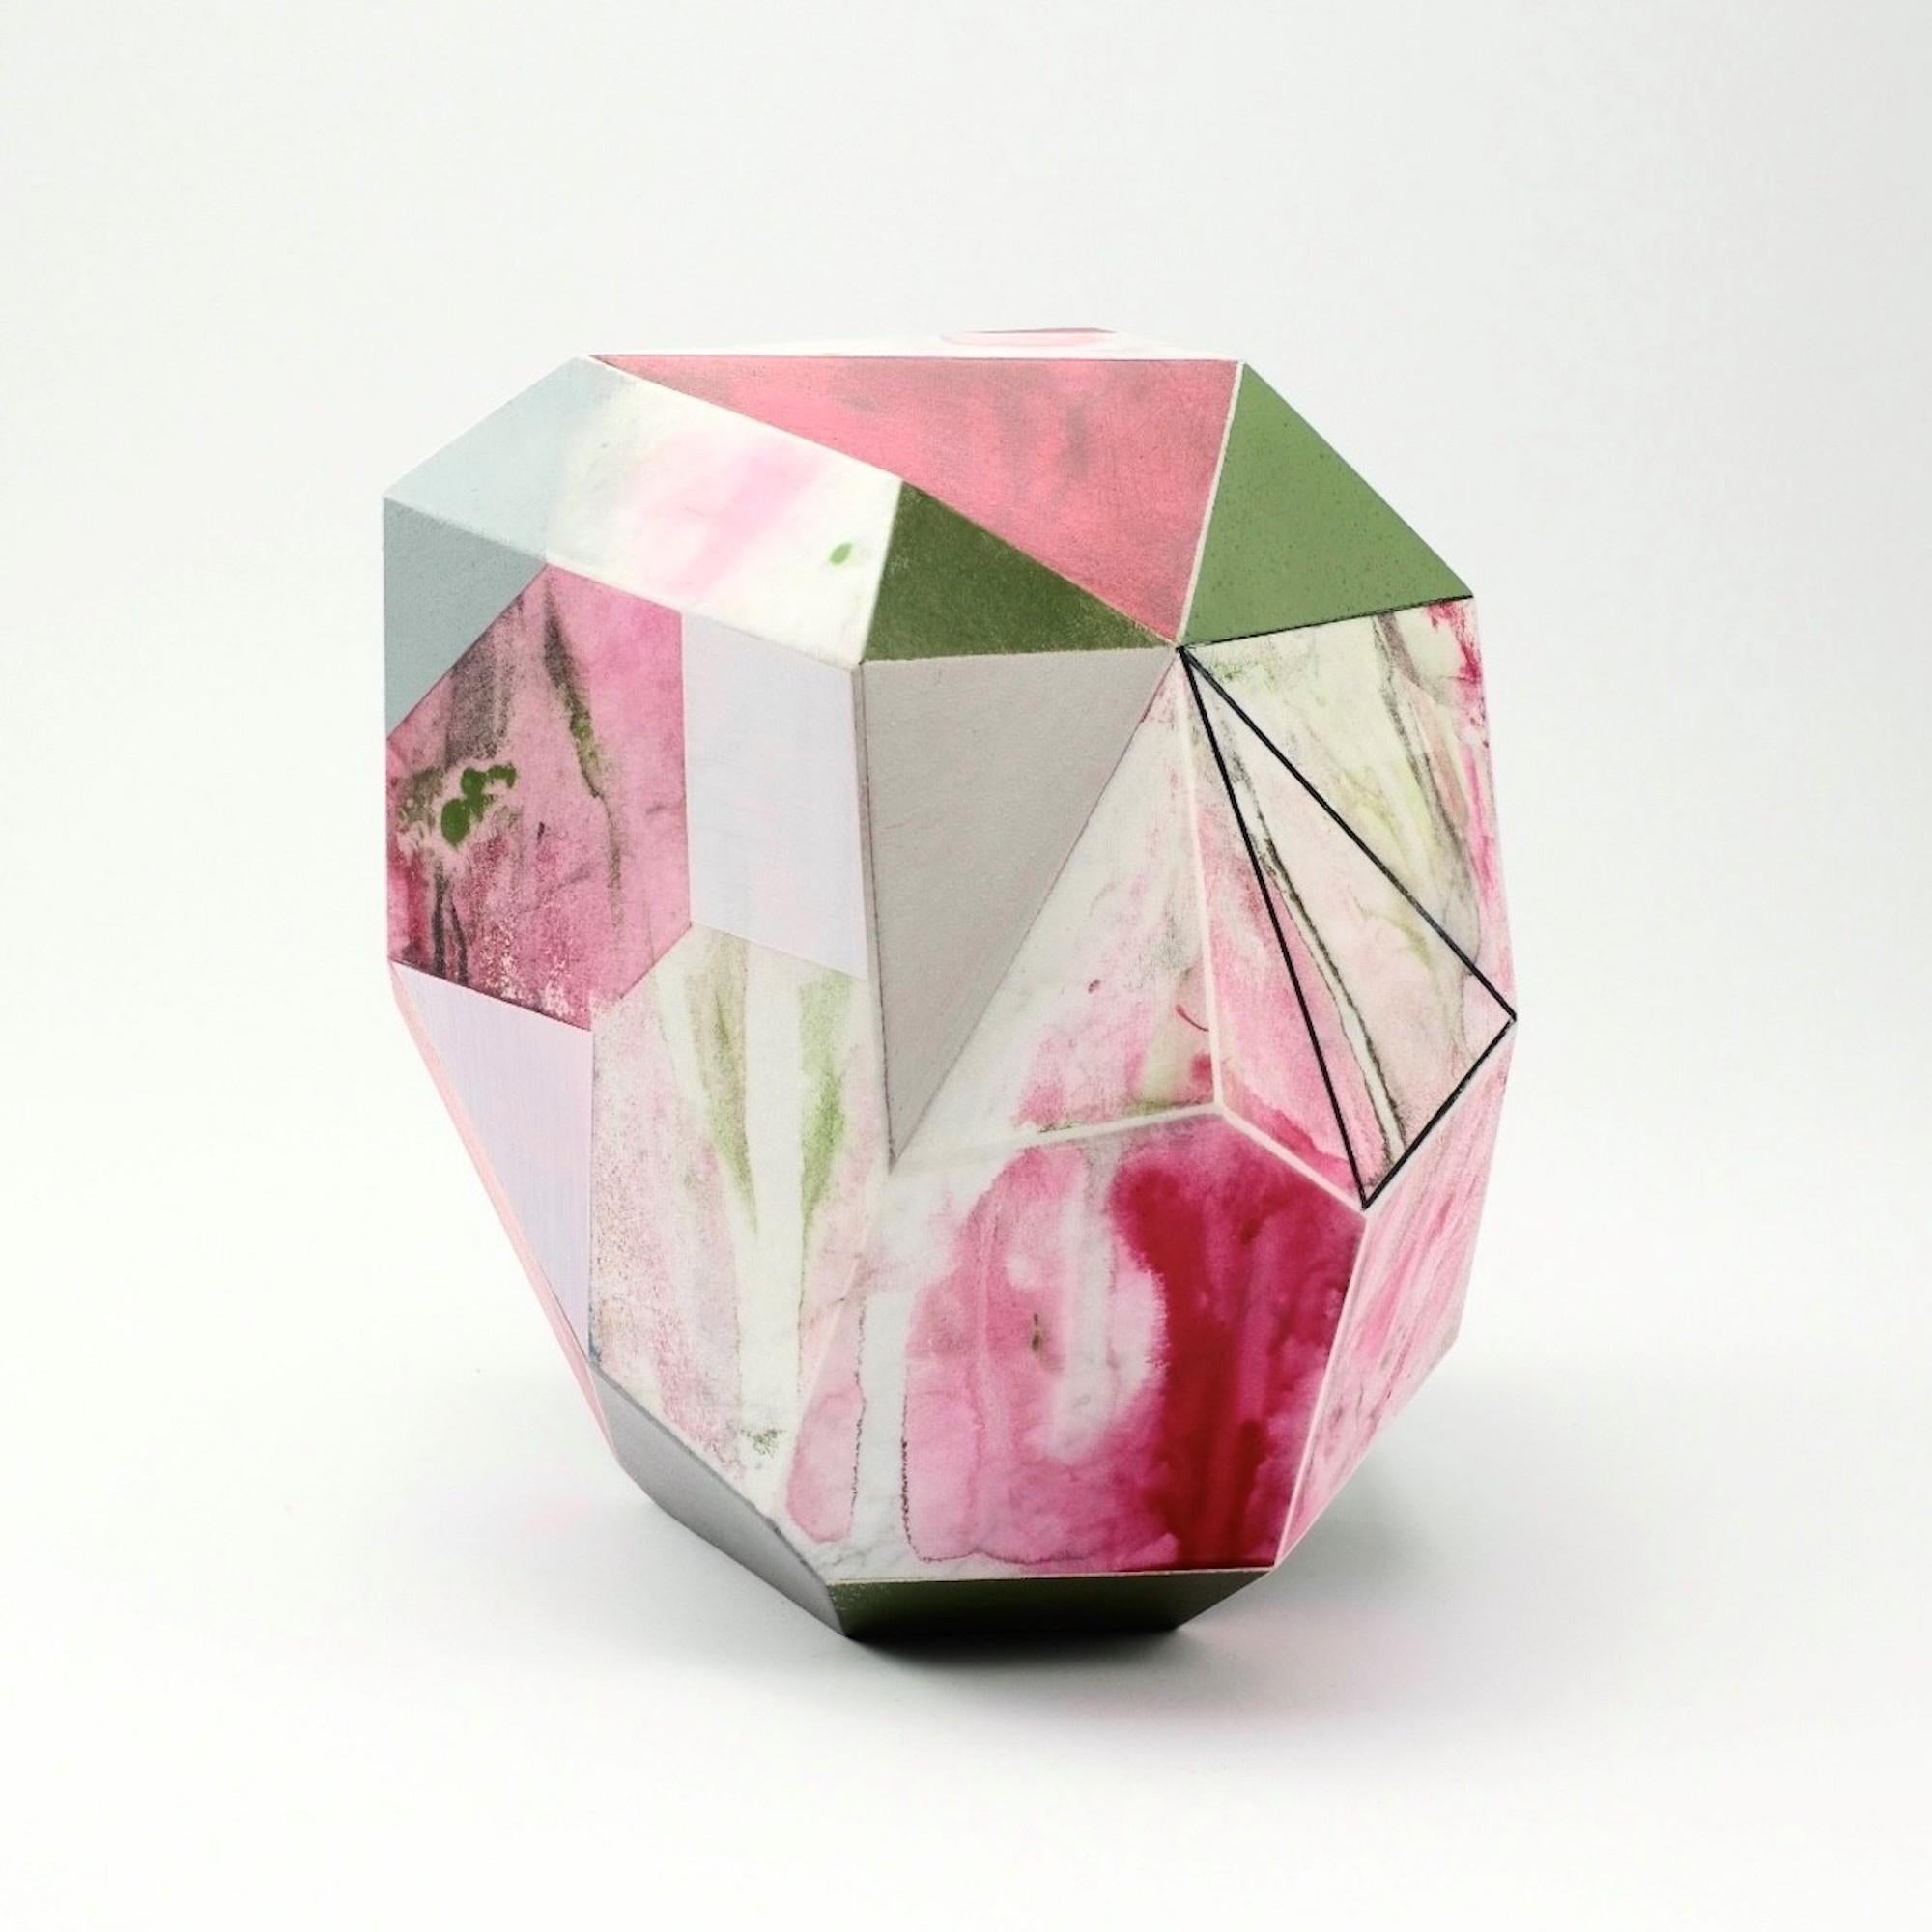 Luna is a unique ink, paint and wax on Carrara marble sculpture by contemporary artist Richard Perry, dimensions are 20 × 20 × 17 cm (7.9 × 7.9 × 6.7 in). 
The sculpture is signed and comes with a certificate of authenticity.

The playful